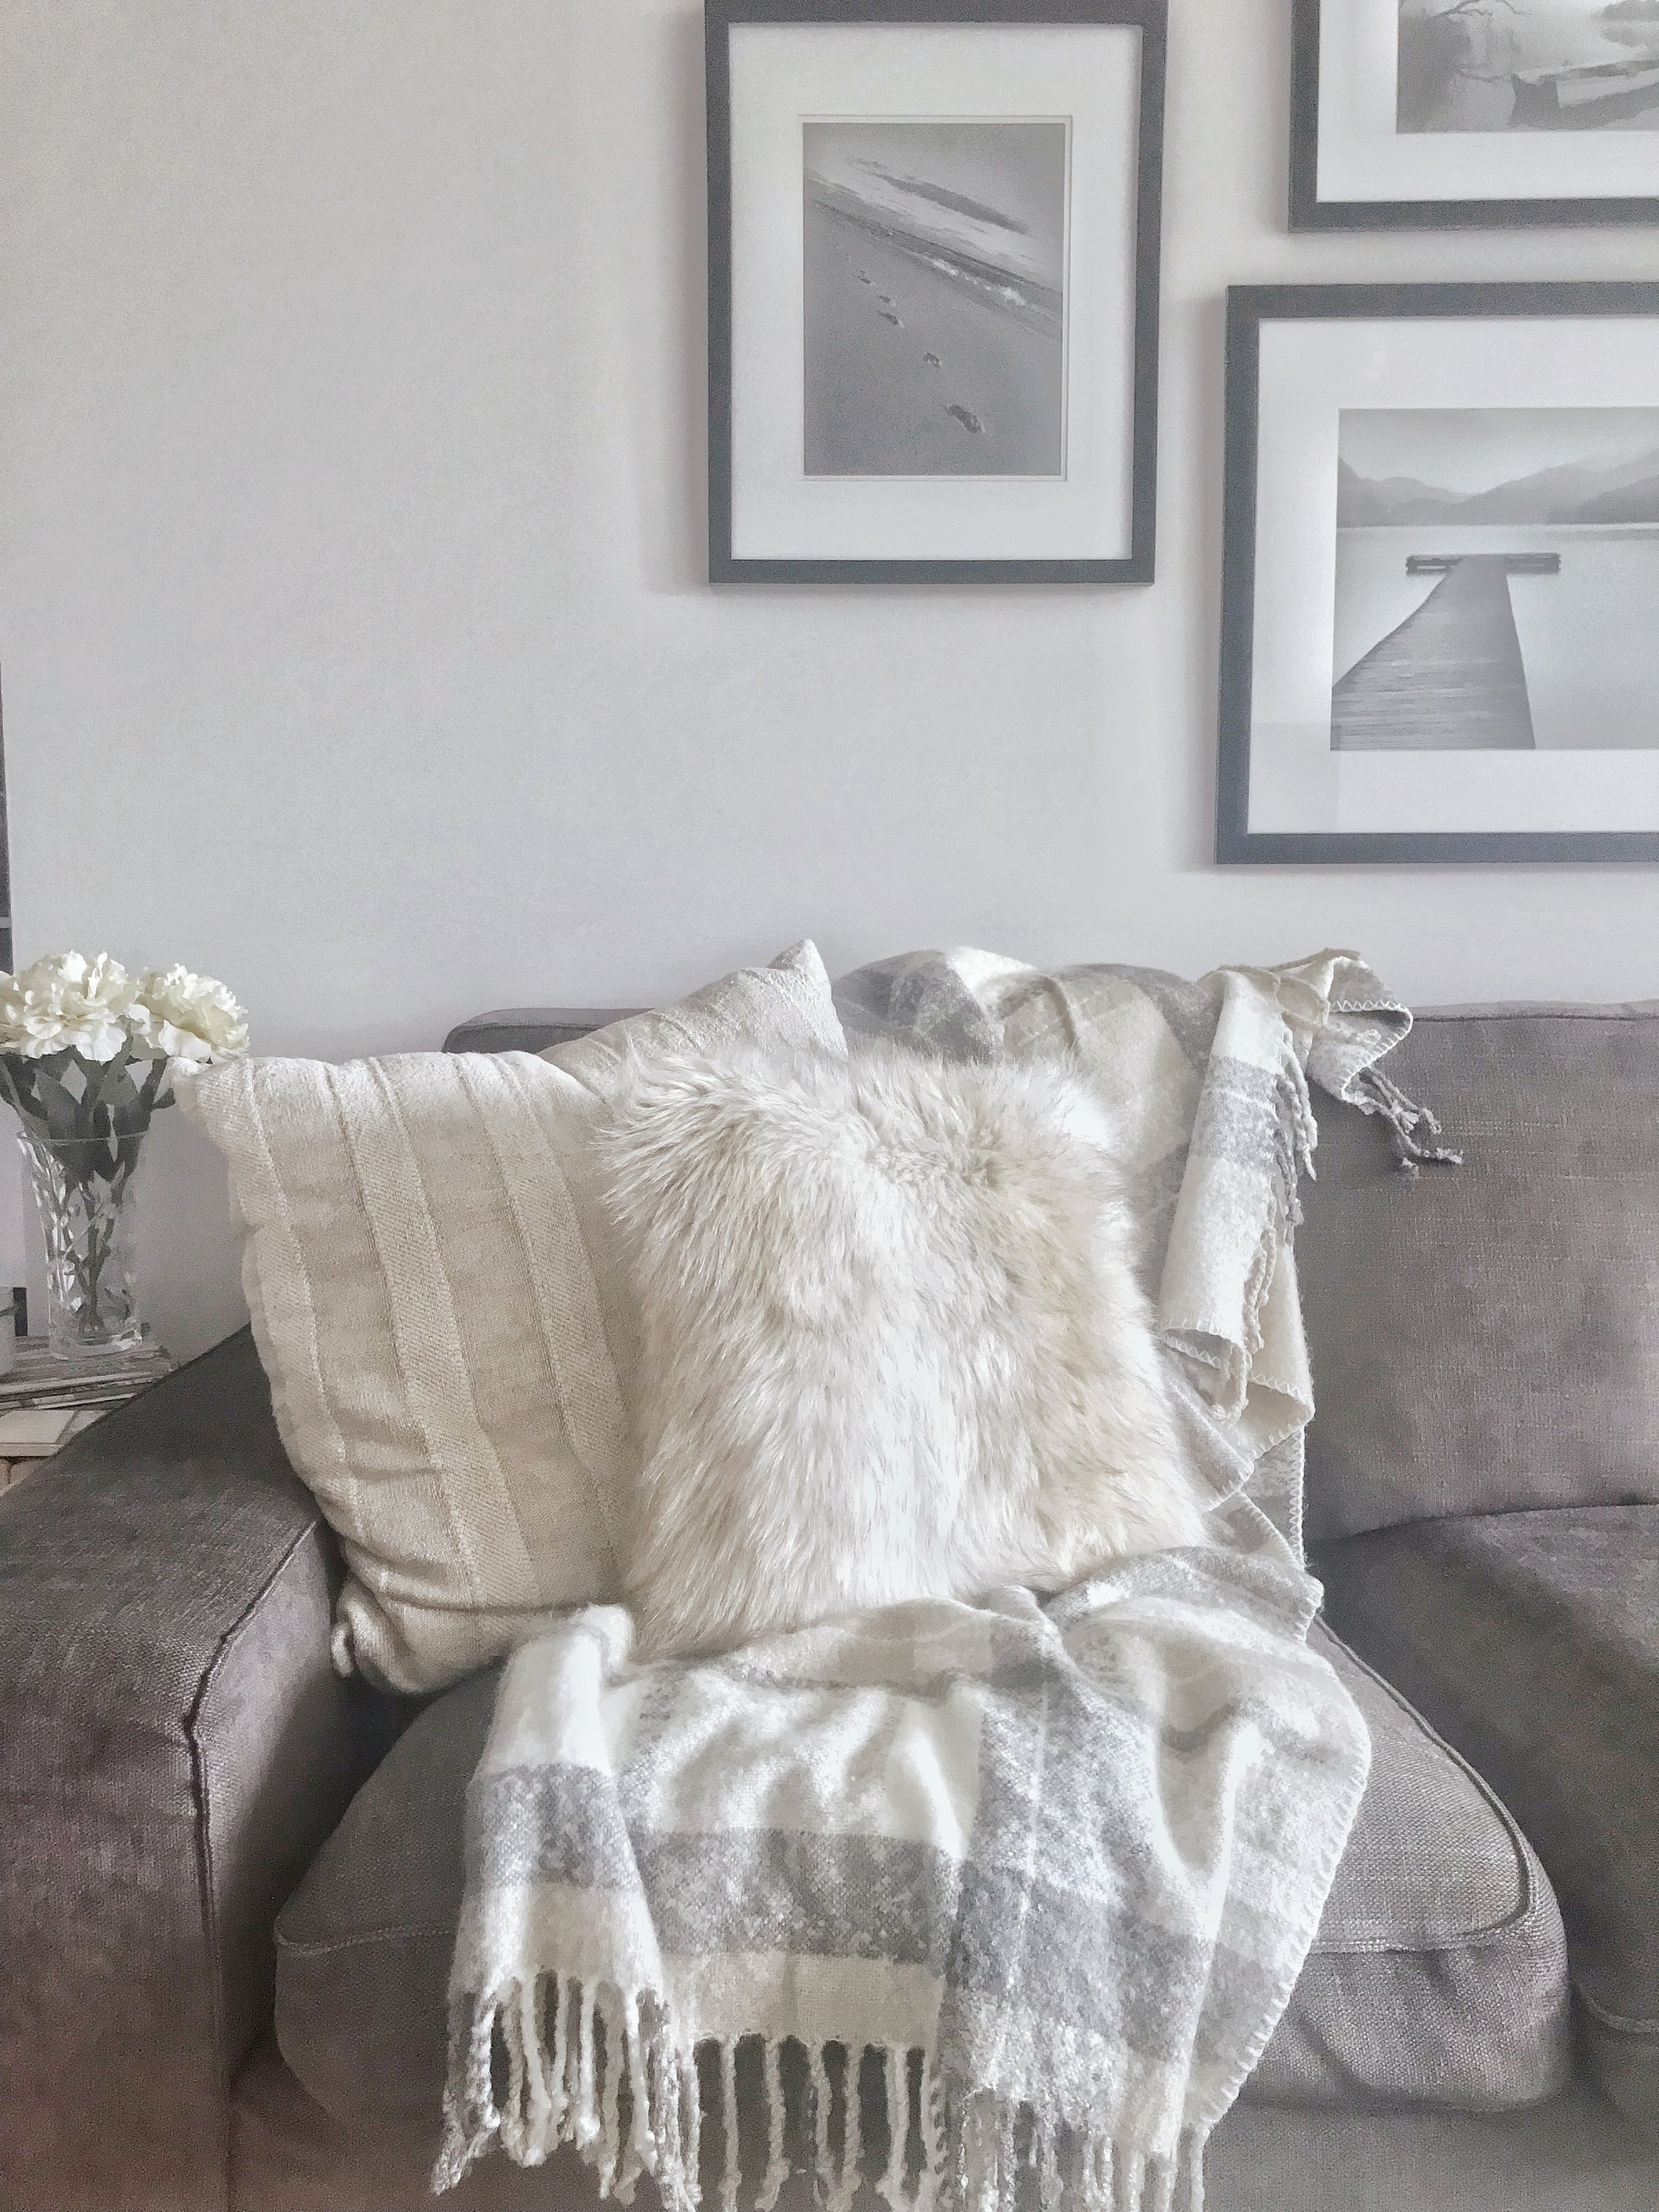 How To: Style a Throw Blanket — The Life She Wanders